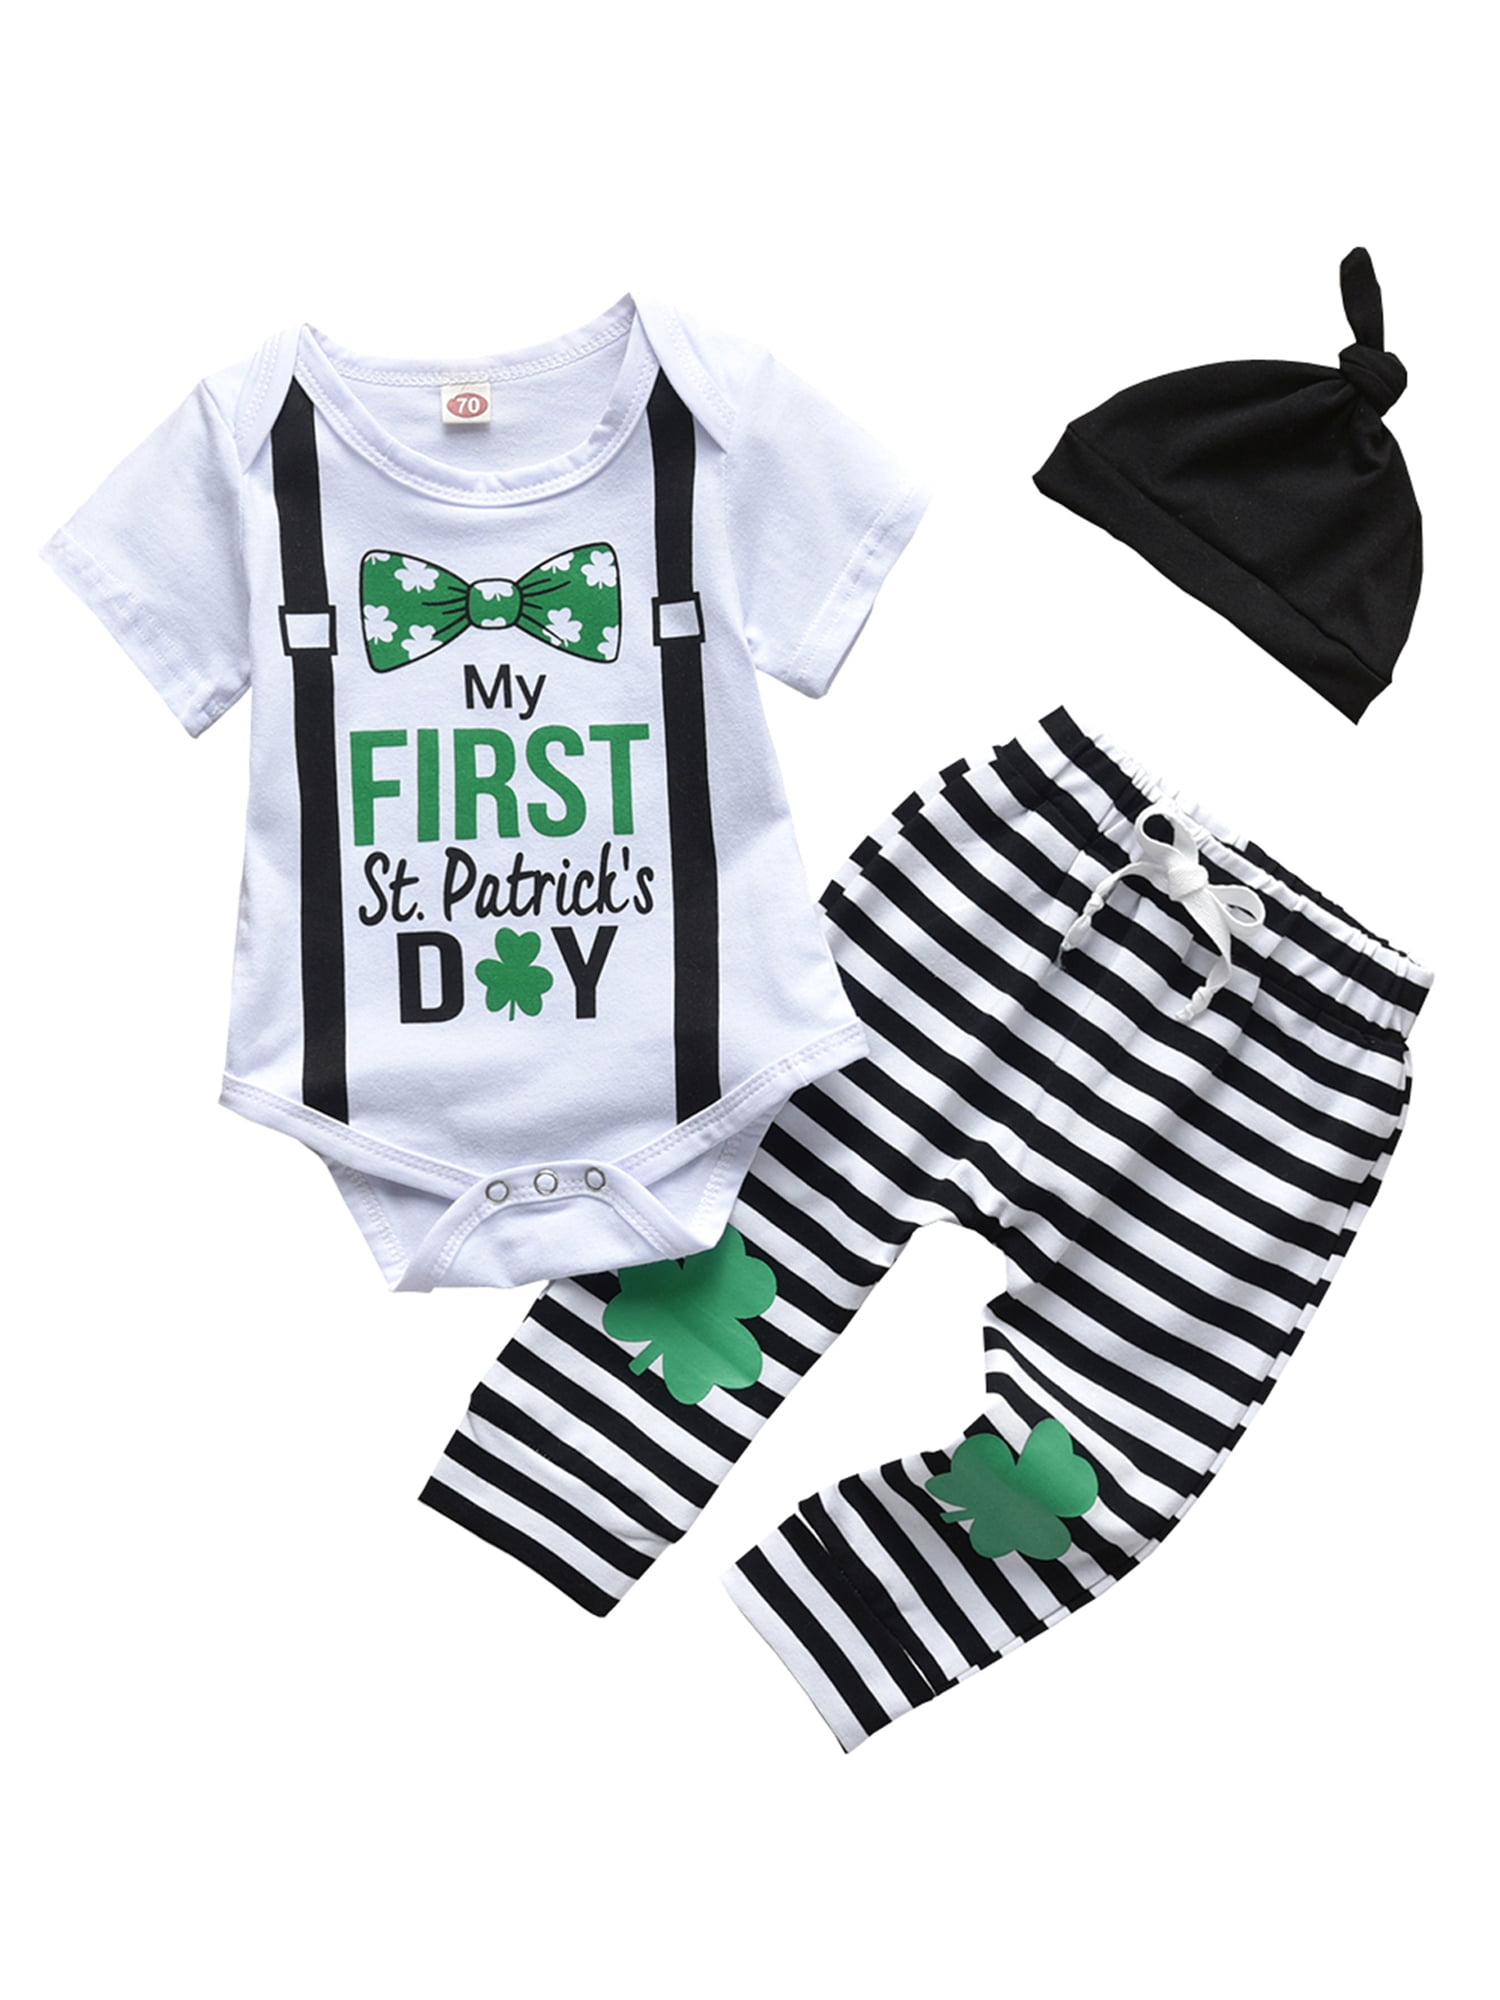 KISSB My First St Patricks Day Newborn Baby Long Sleeve Striped Romper One Piece Overall with Hood St Patricks Day Outfit 